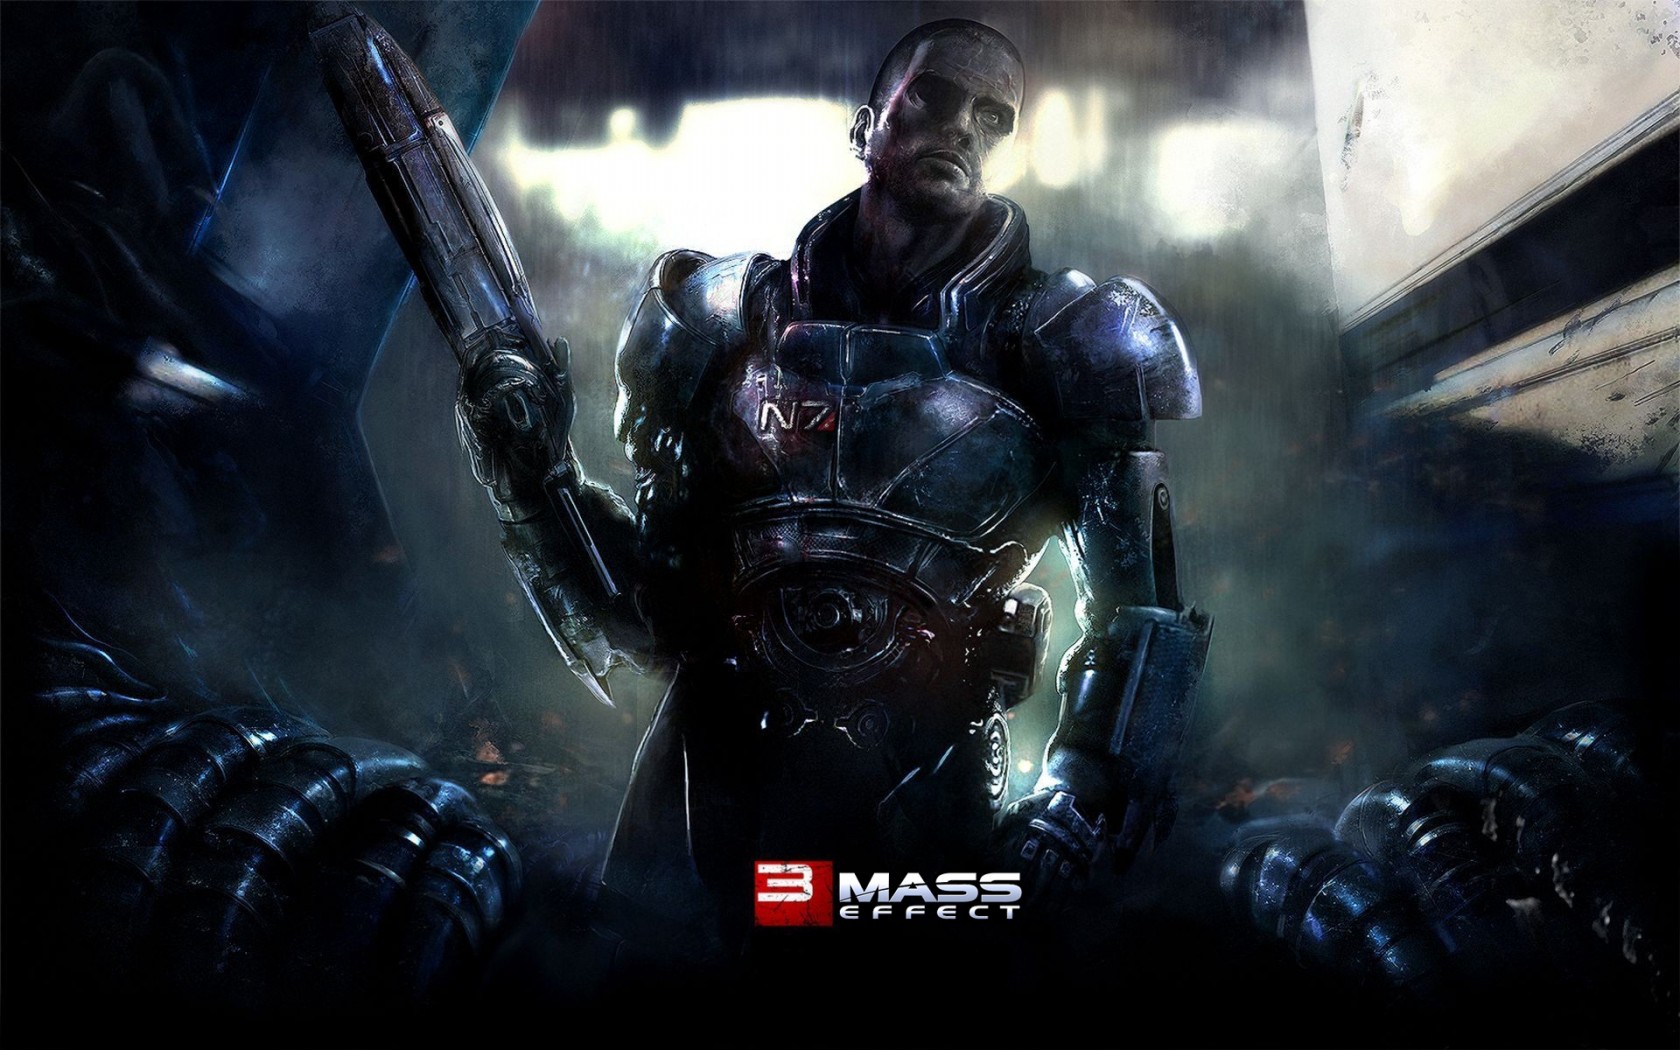 Mass Effect 3 Shepard N7 Wallpaper Hd Games 4k Wallpapers Images Photos And Background